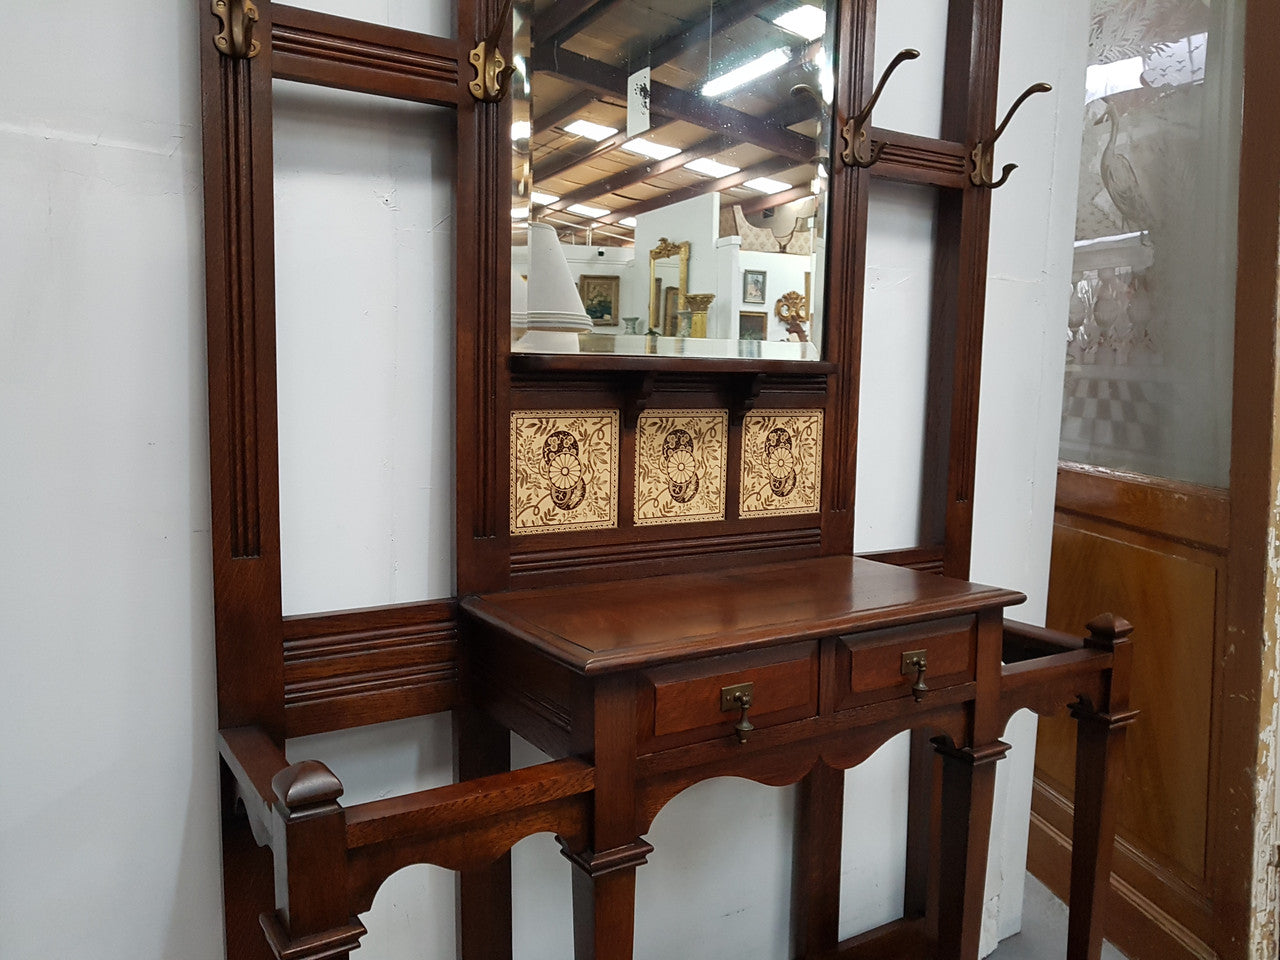 Beautiful English Edwardian tiled back hall stand, with nine brass hooks, two small drawers and retaining it's original mirror and showing signs of age. In good original condition.